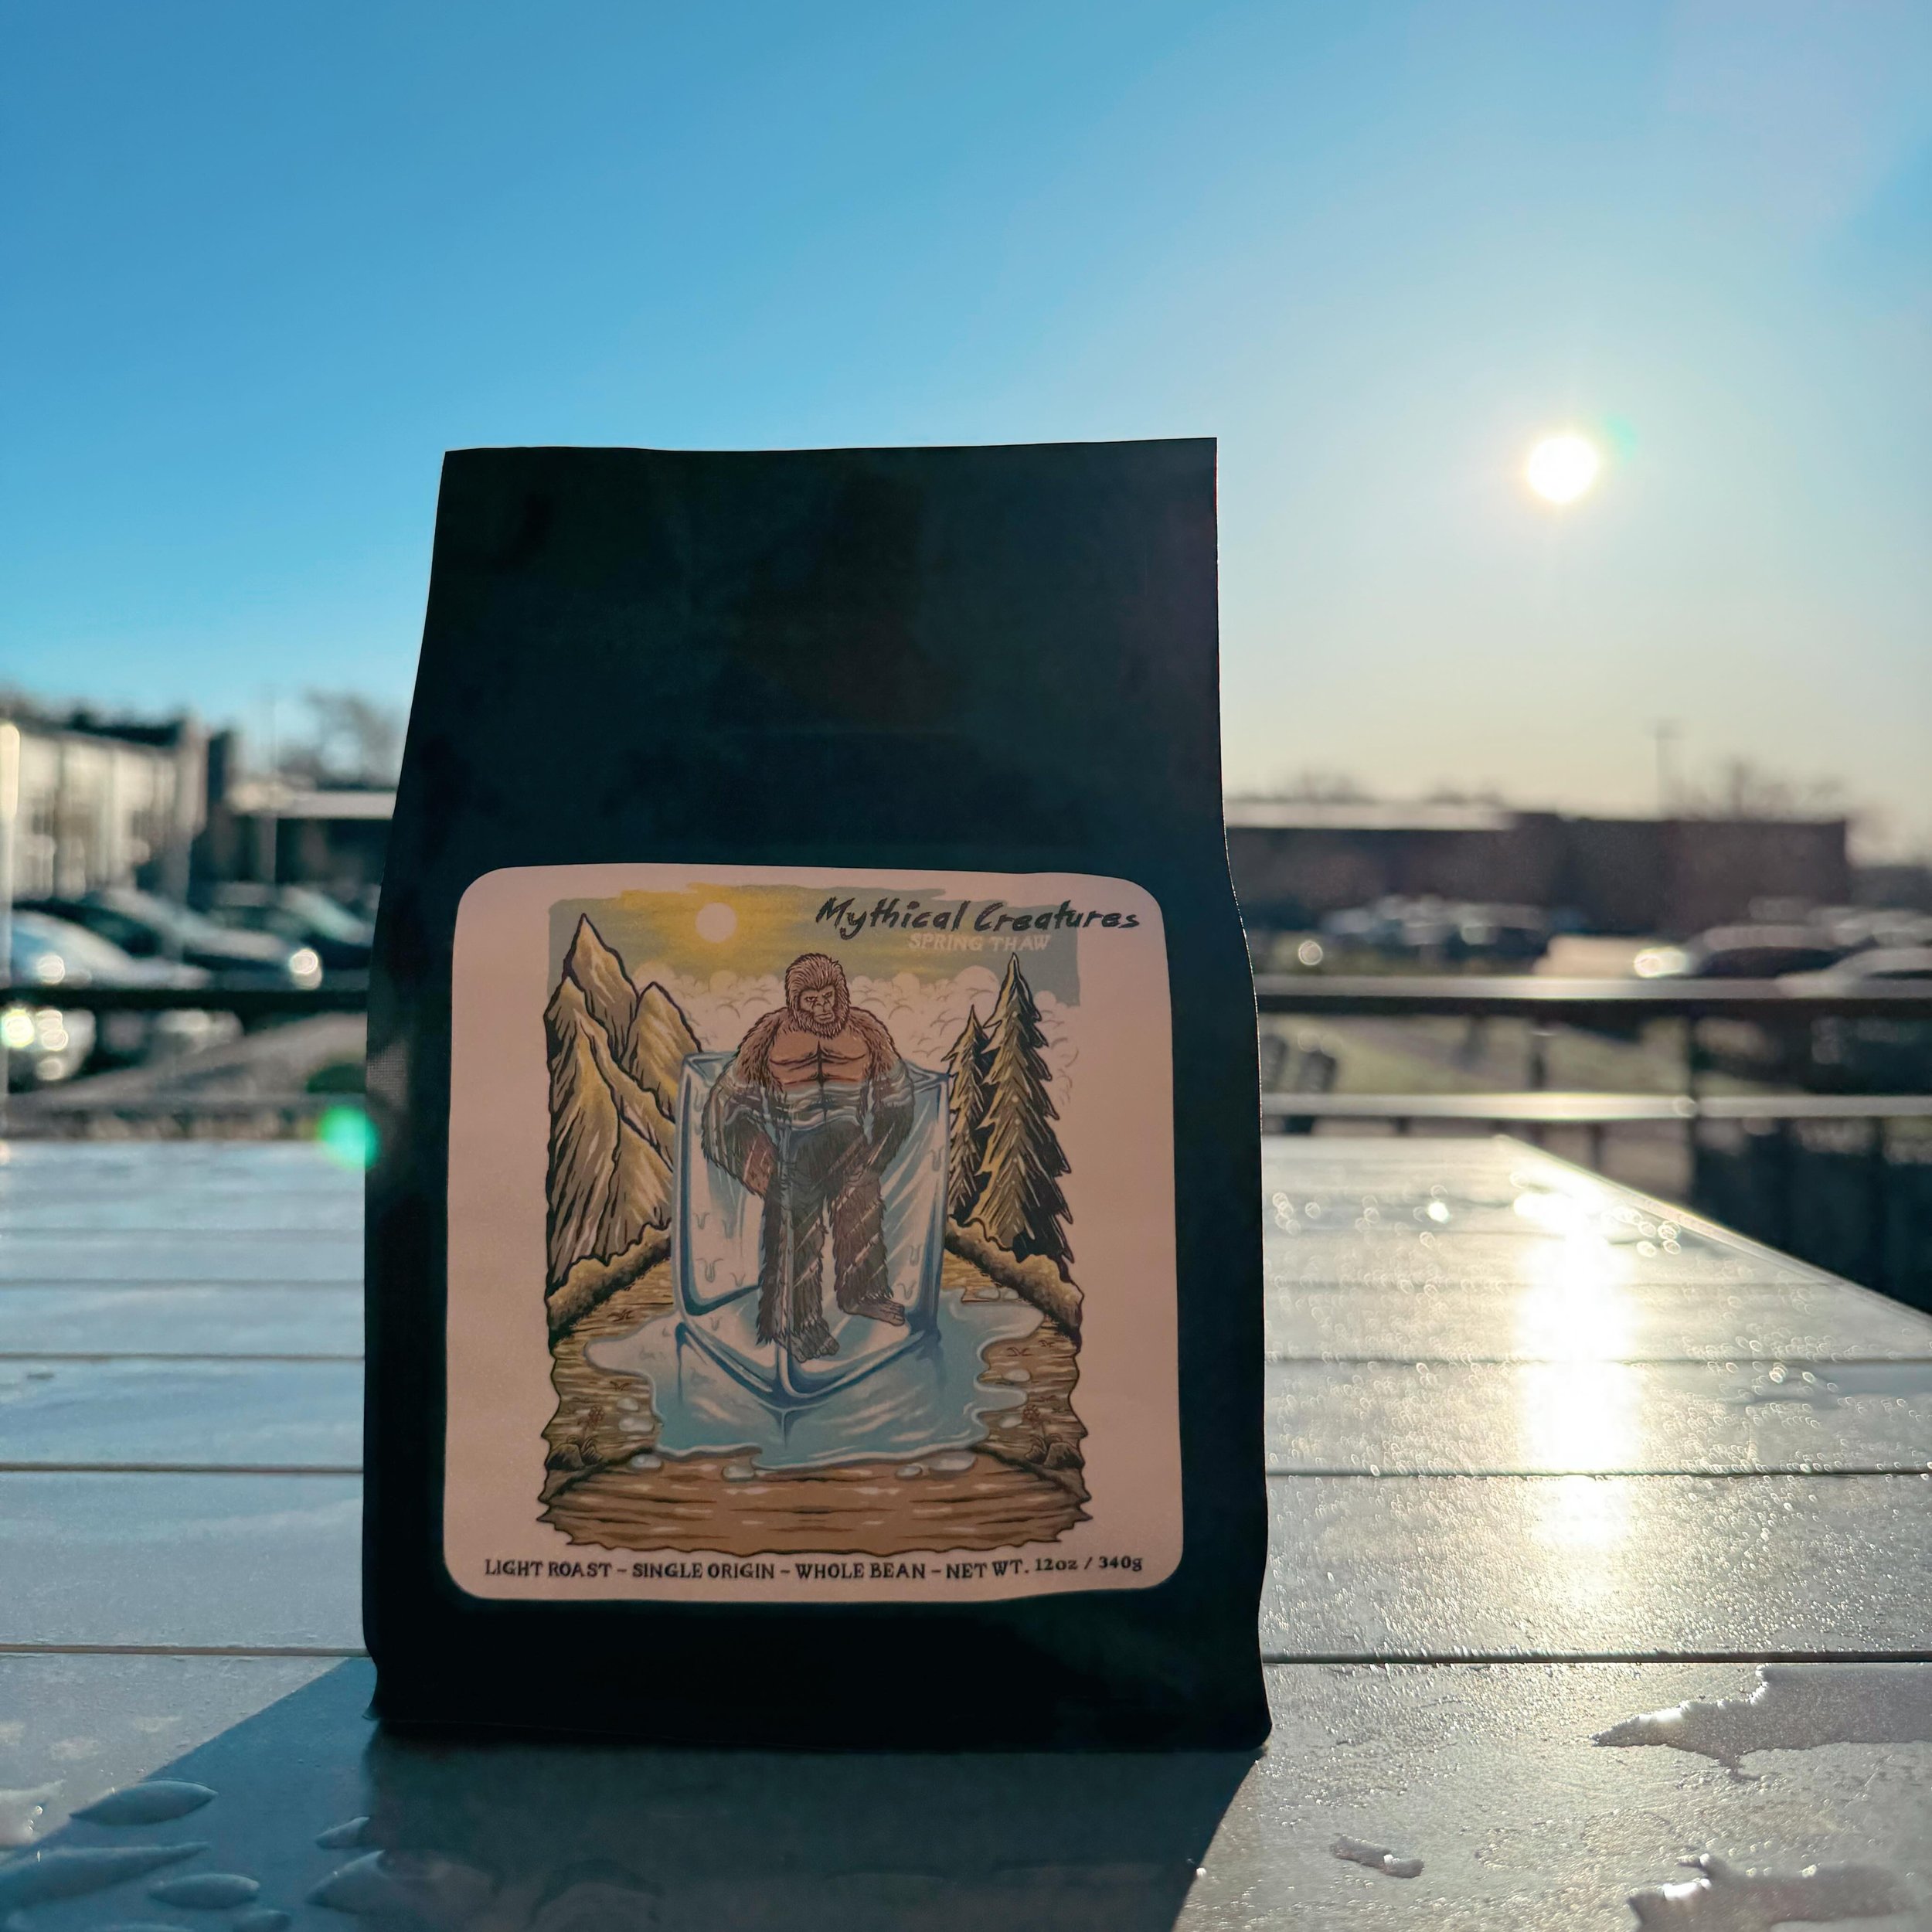 30s, 70s, 40s, 20s, 60s
☀️ ❄️ 🌧️ 
The western New York weather is predictable as NOTHING!

Ring in the Spring weather with our new single origin light roast.

Spring Thaw 
Origin : Ethiopia 
Farm : Limmu Kossa Estates 
Elevation : 1800-2200 MASL
Tas